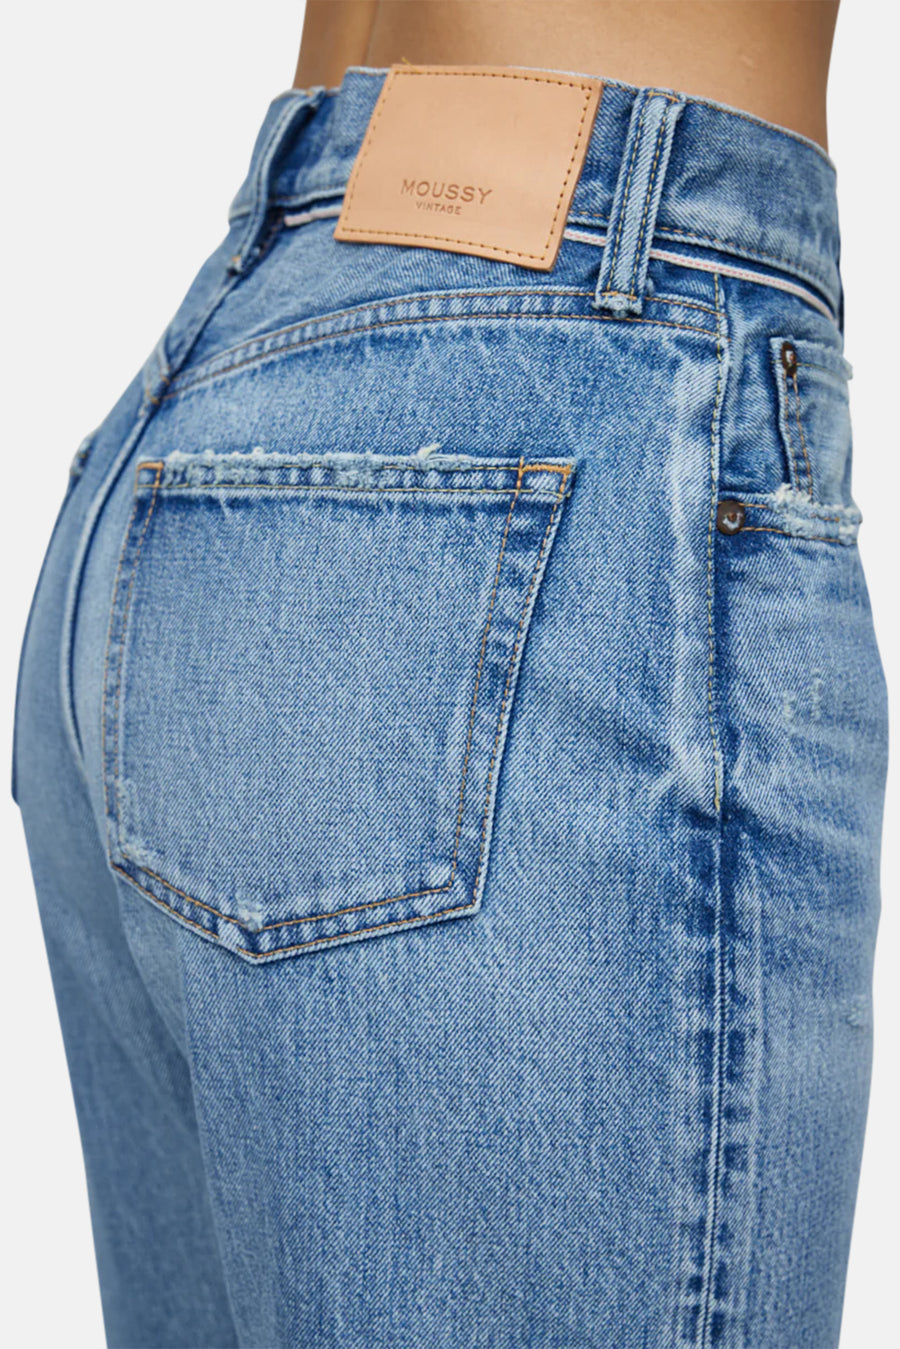 Clifton Remake Flare Jean Blue